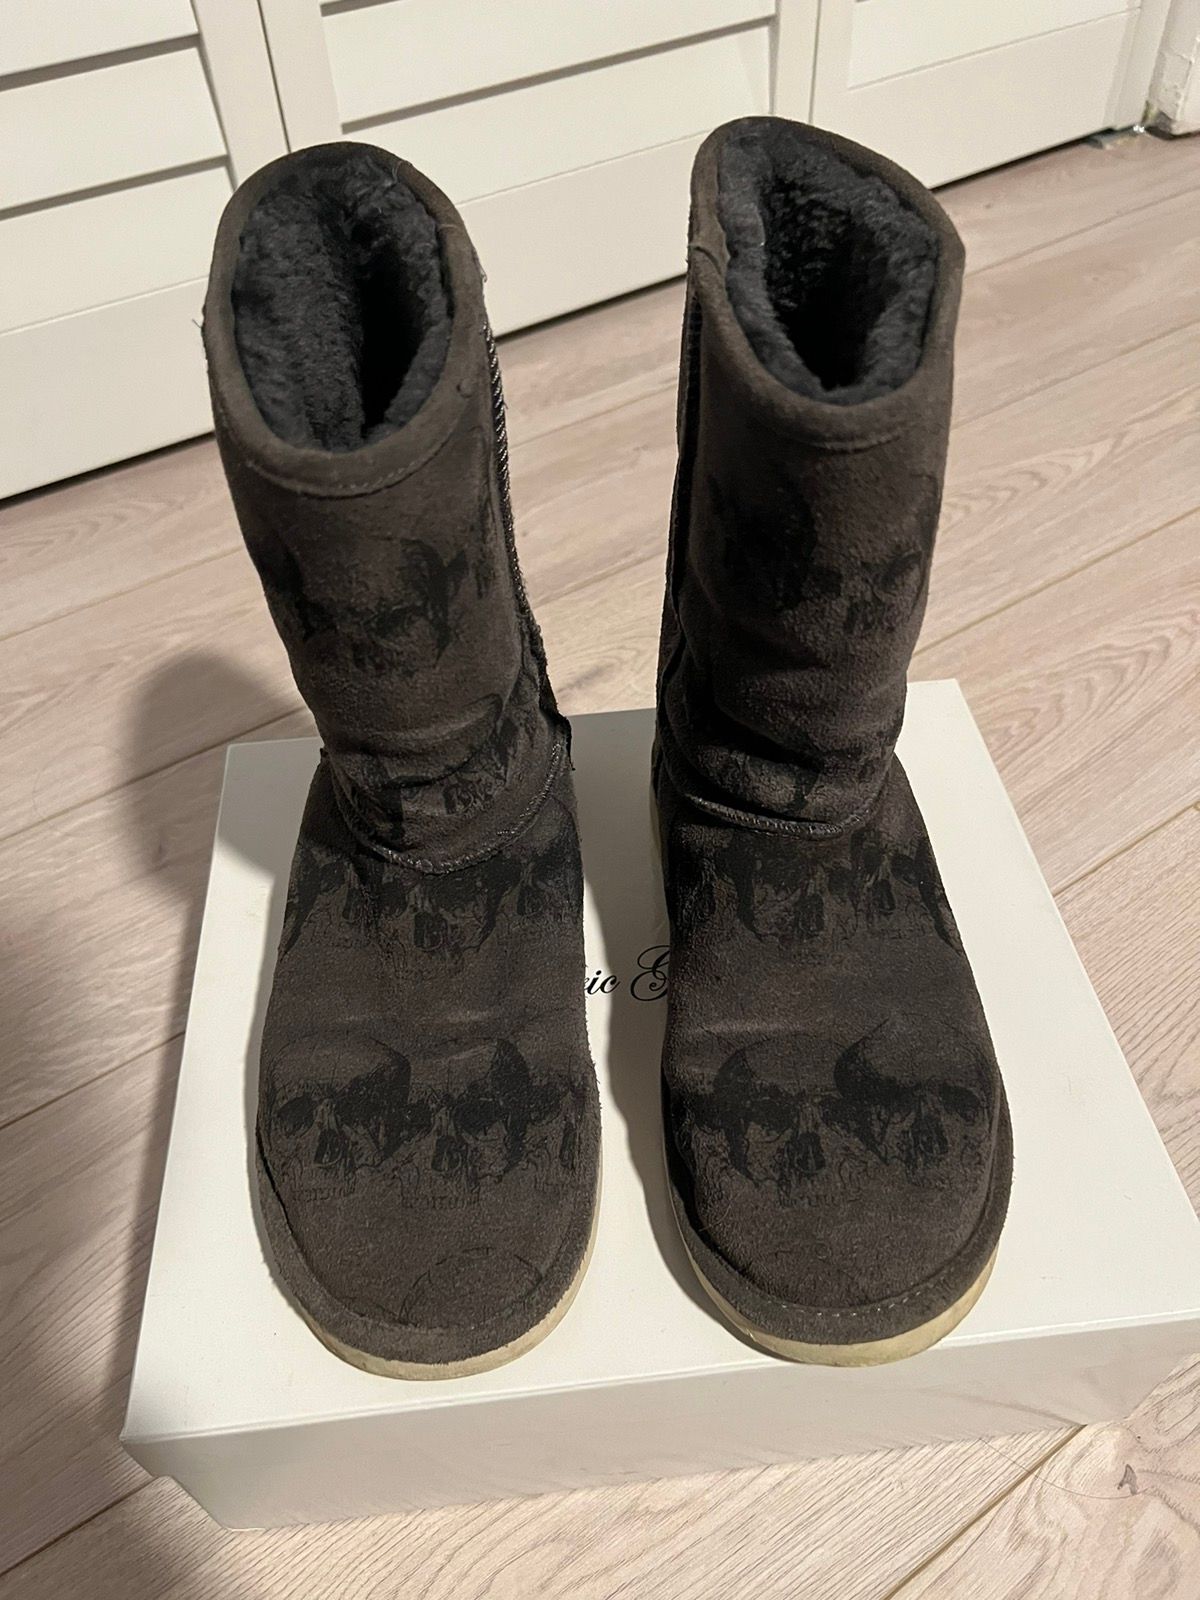 Hysteric Glamour Skull UGG Shoes - 1